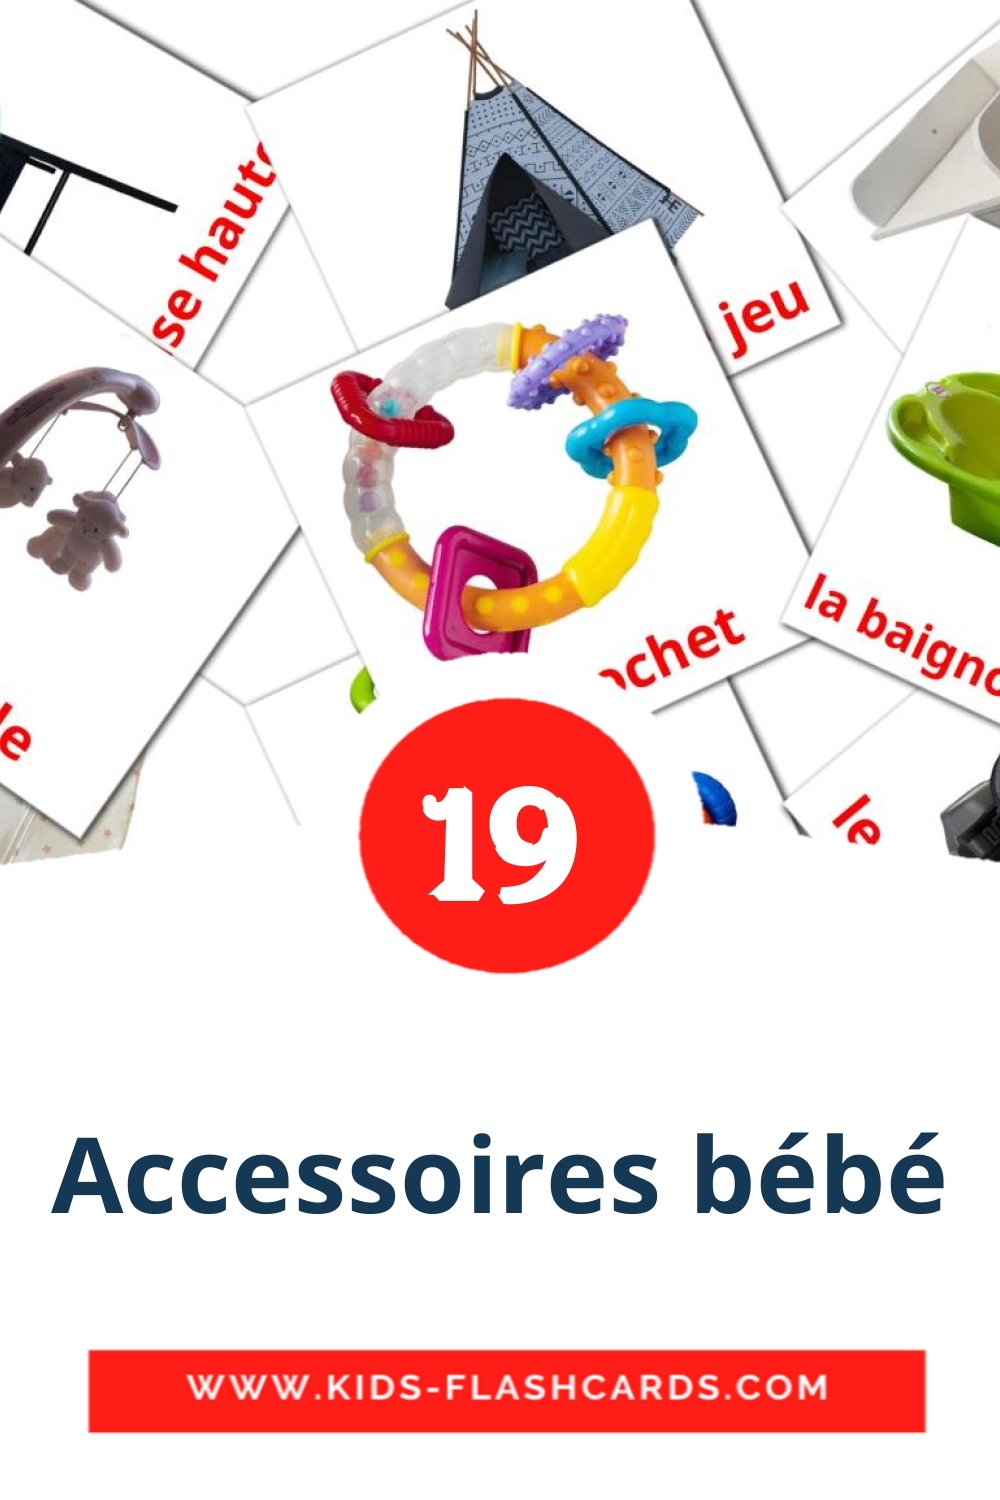 20 Accessoires bébé Picture Cards for Kindergarden in french